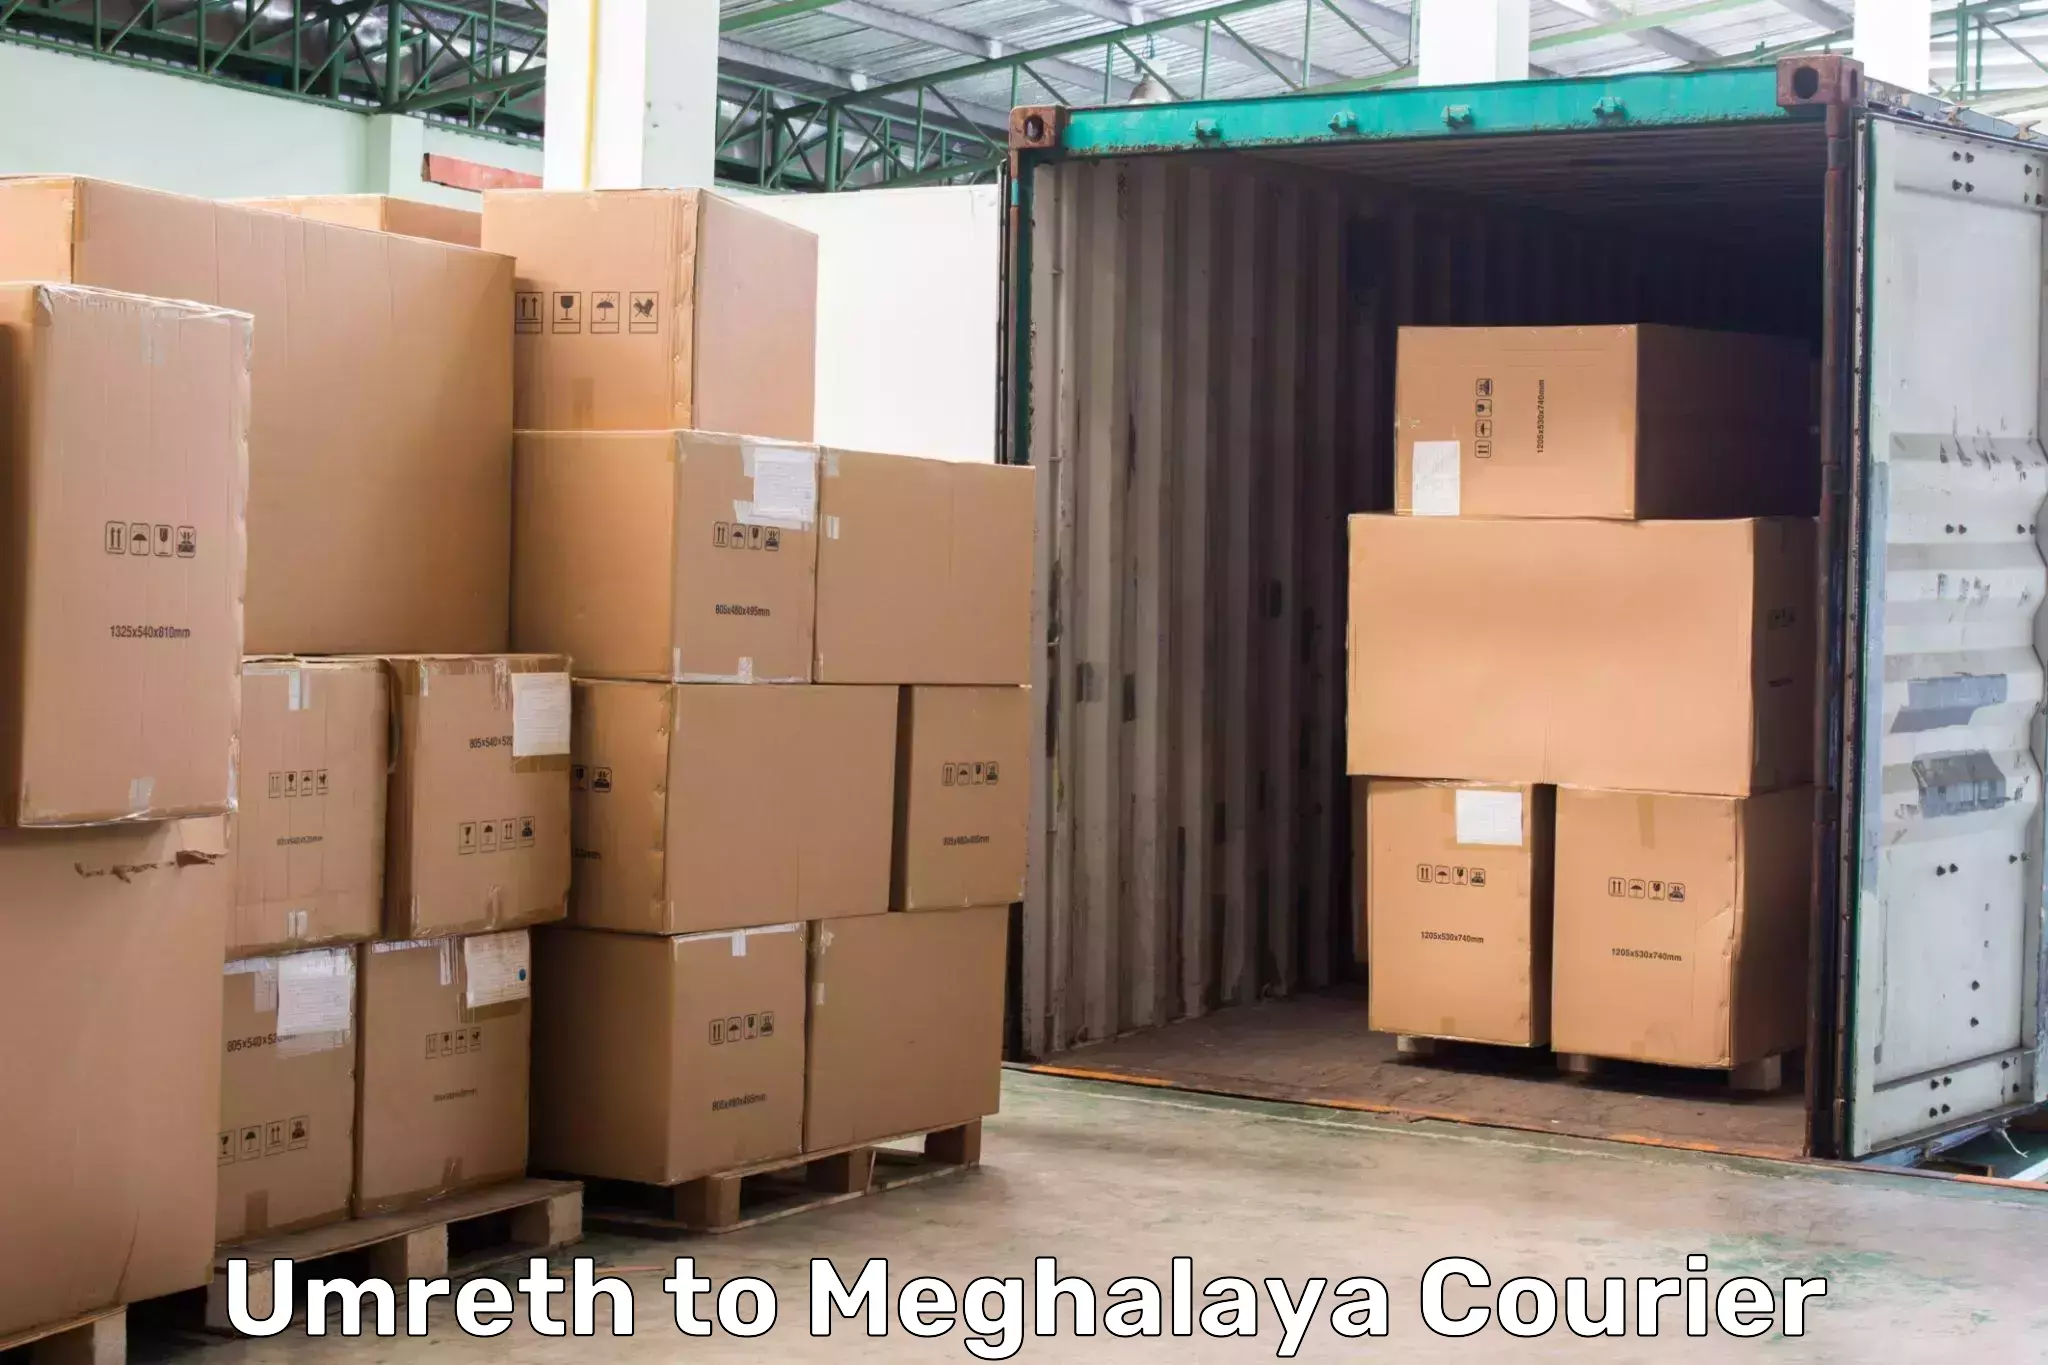 Package delivery network Umreth to Meghalaya